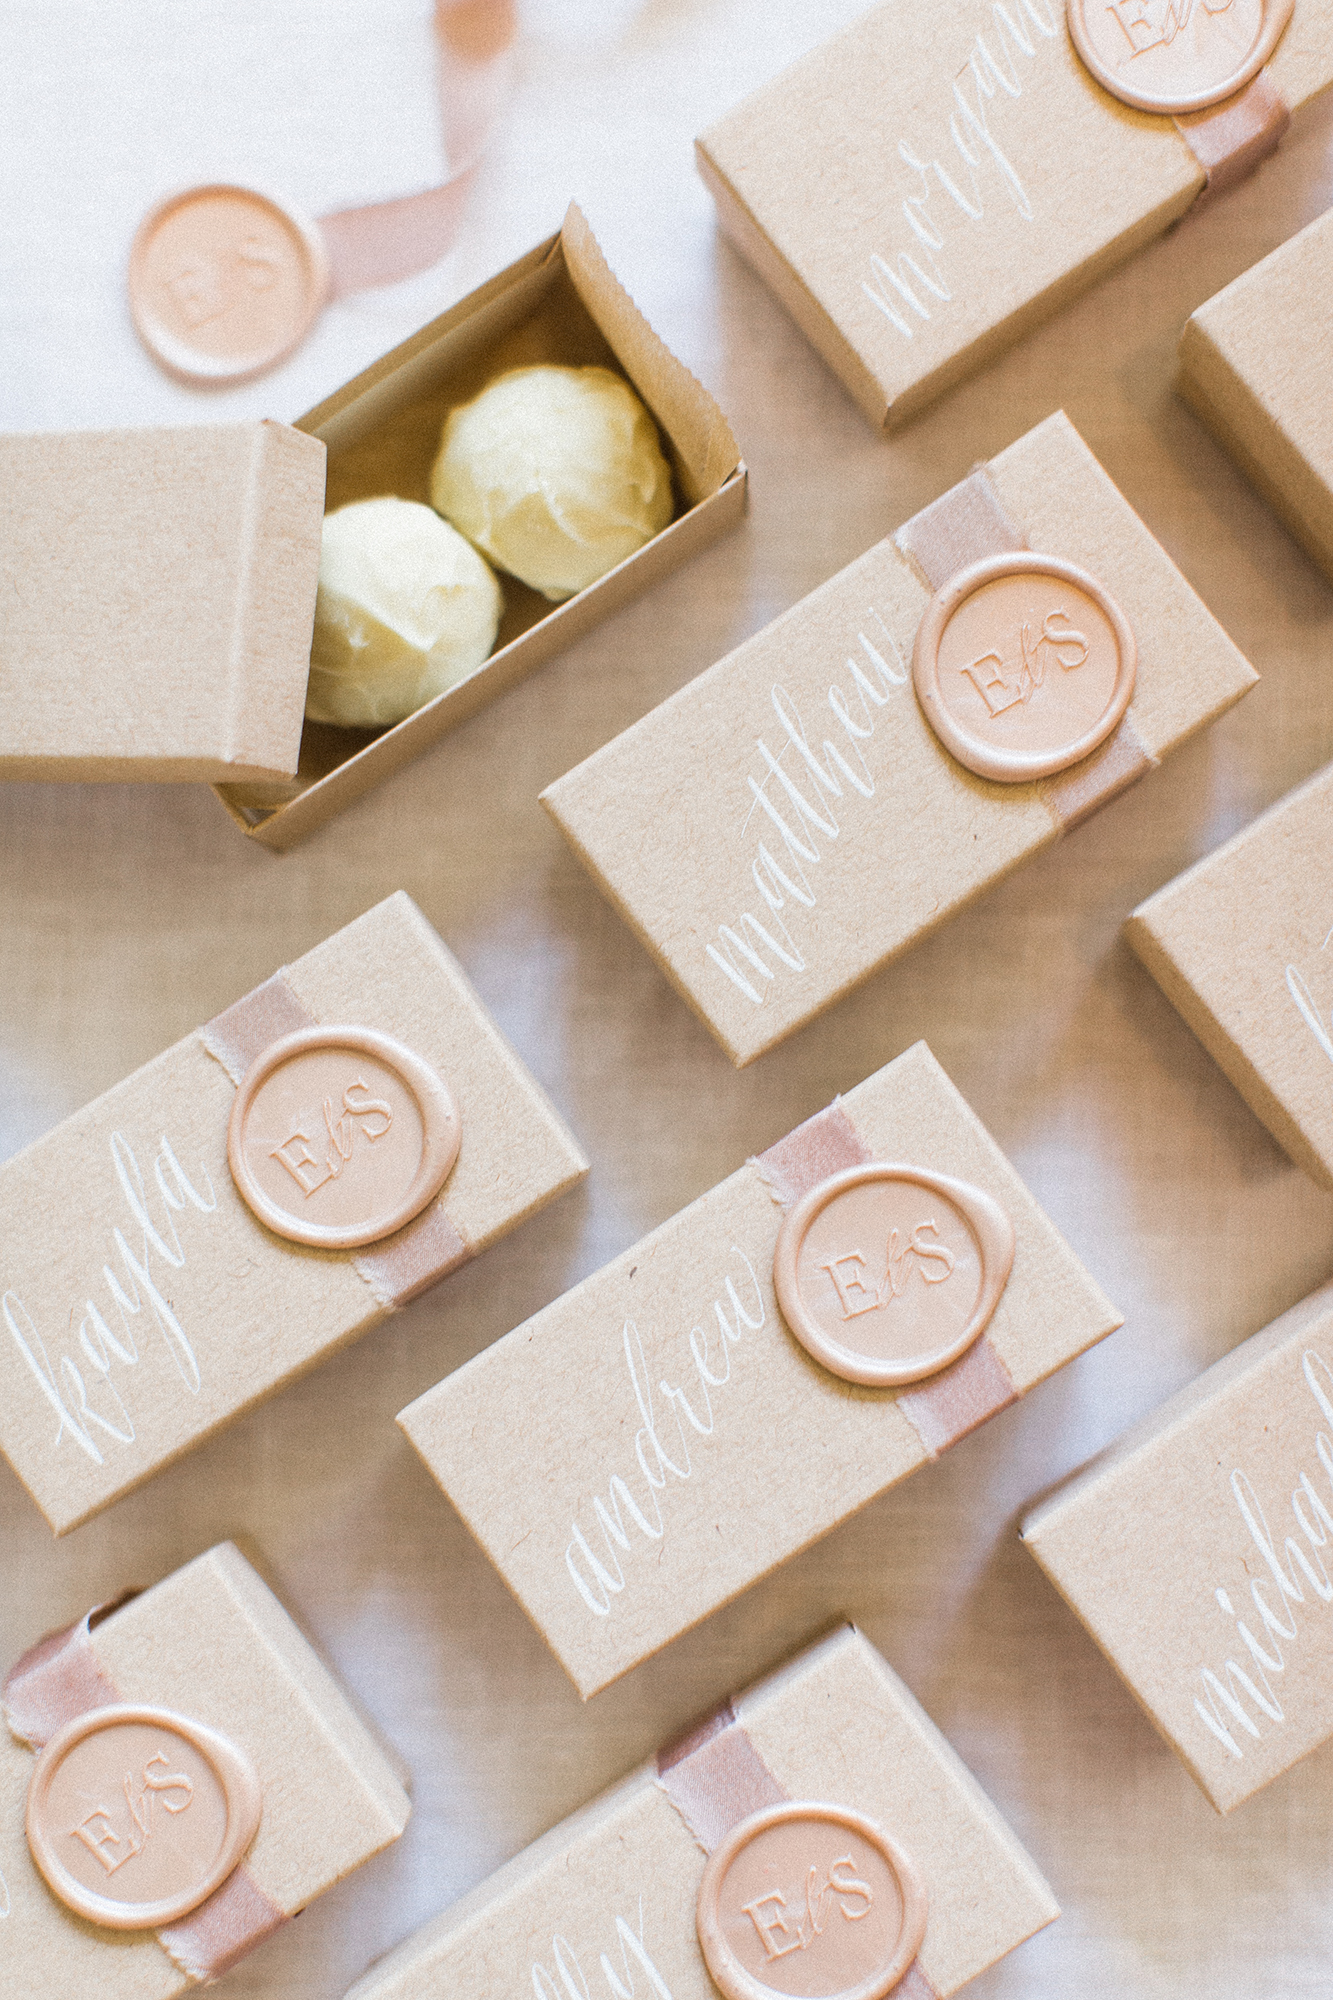 37-edible-wedding-favors-guests-will-eat-up-literally-martha